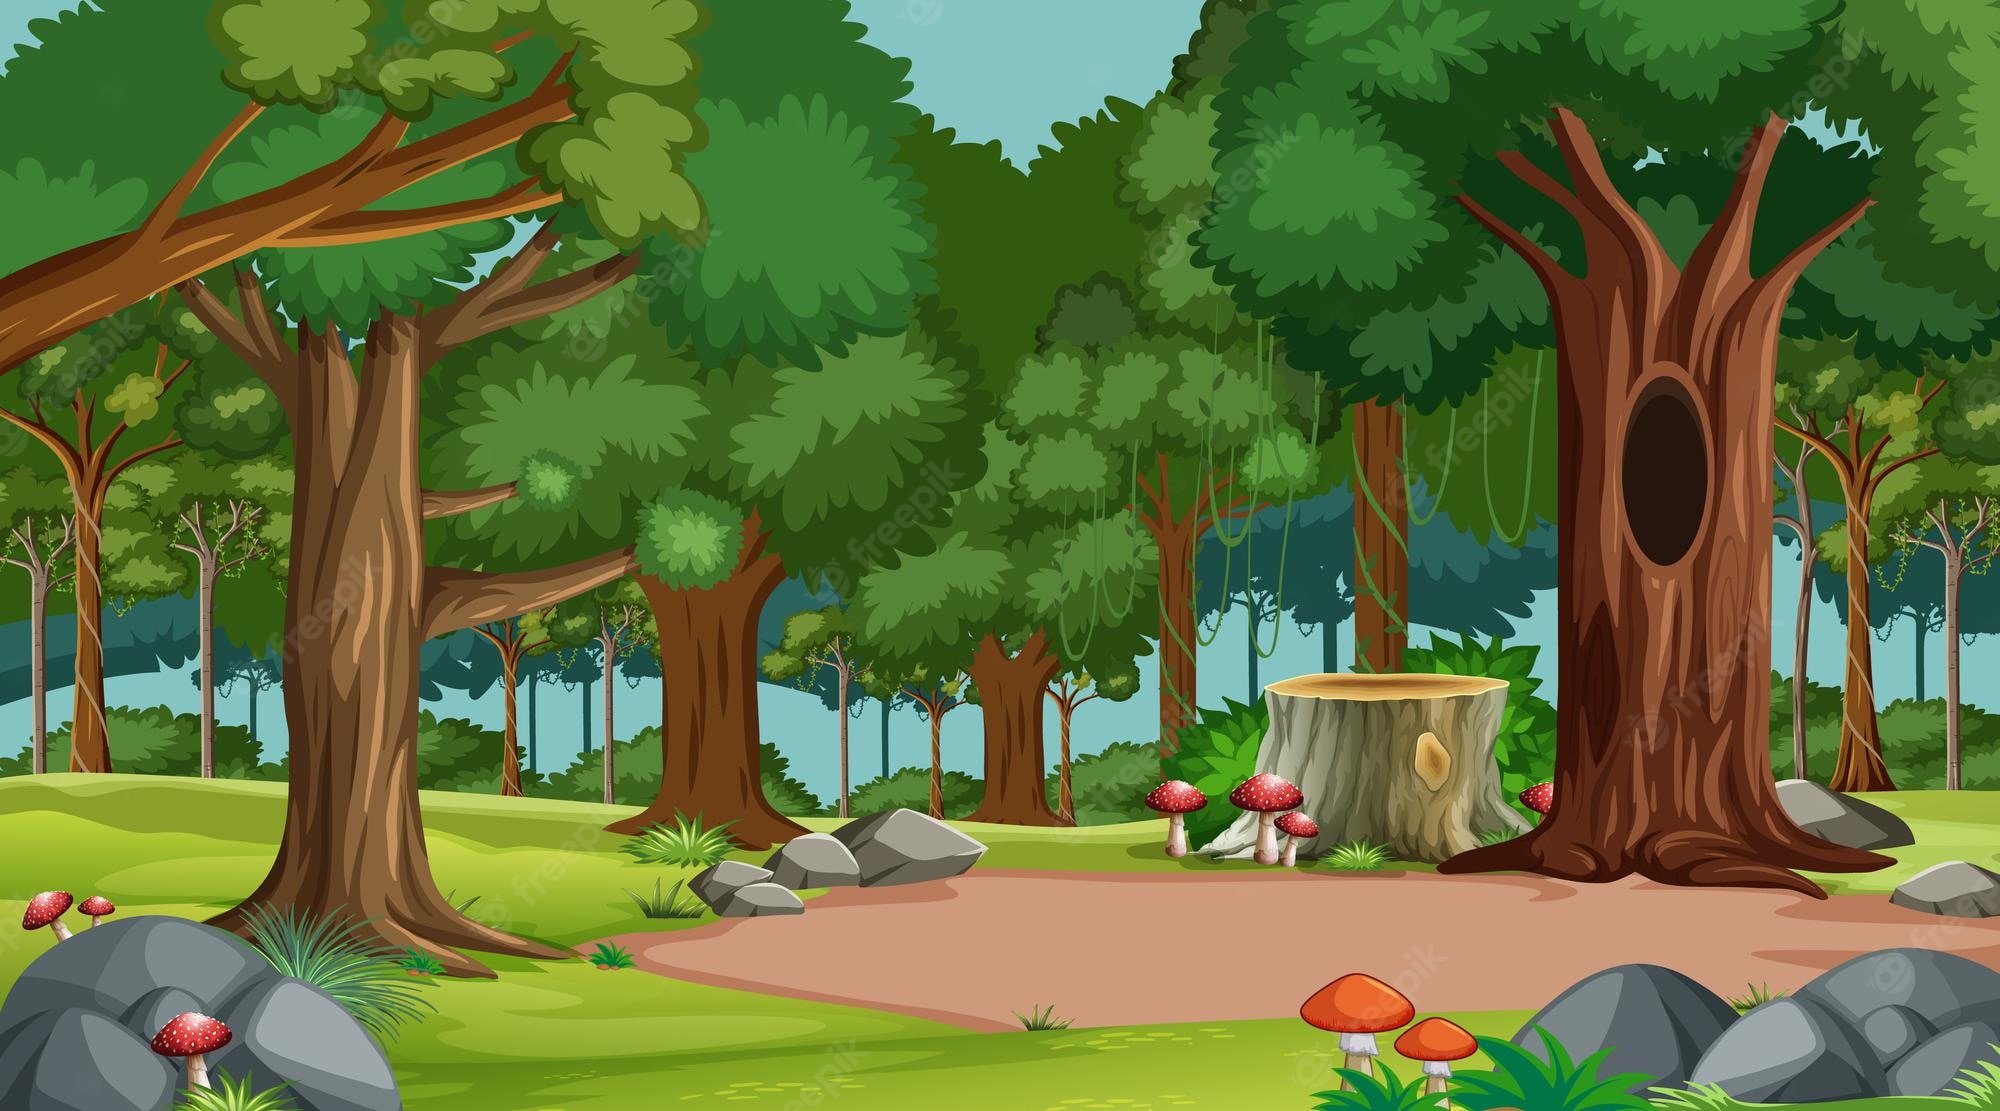 Download Free 100 + forest cartoon